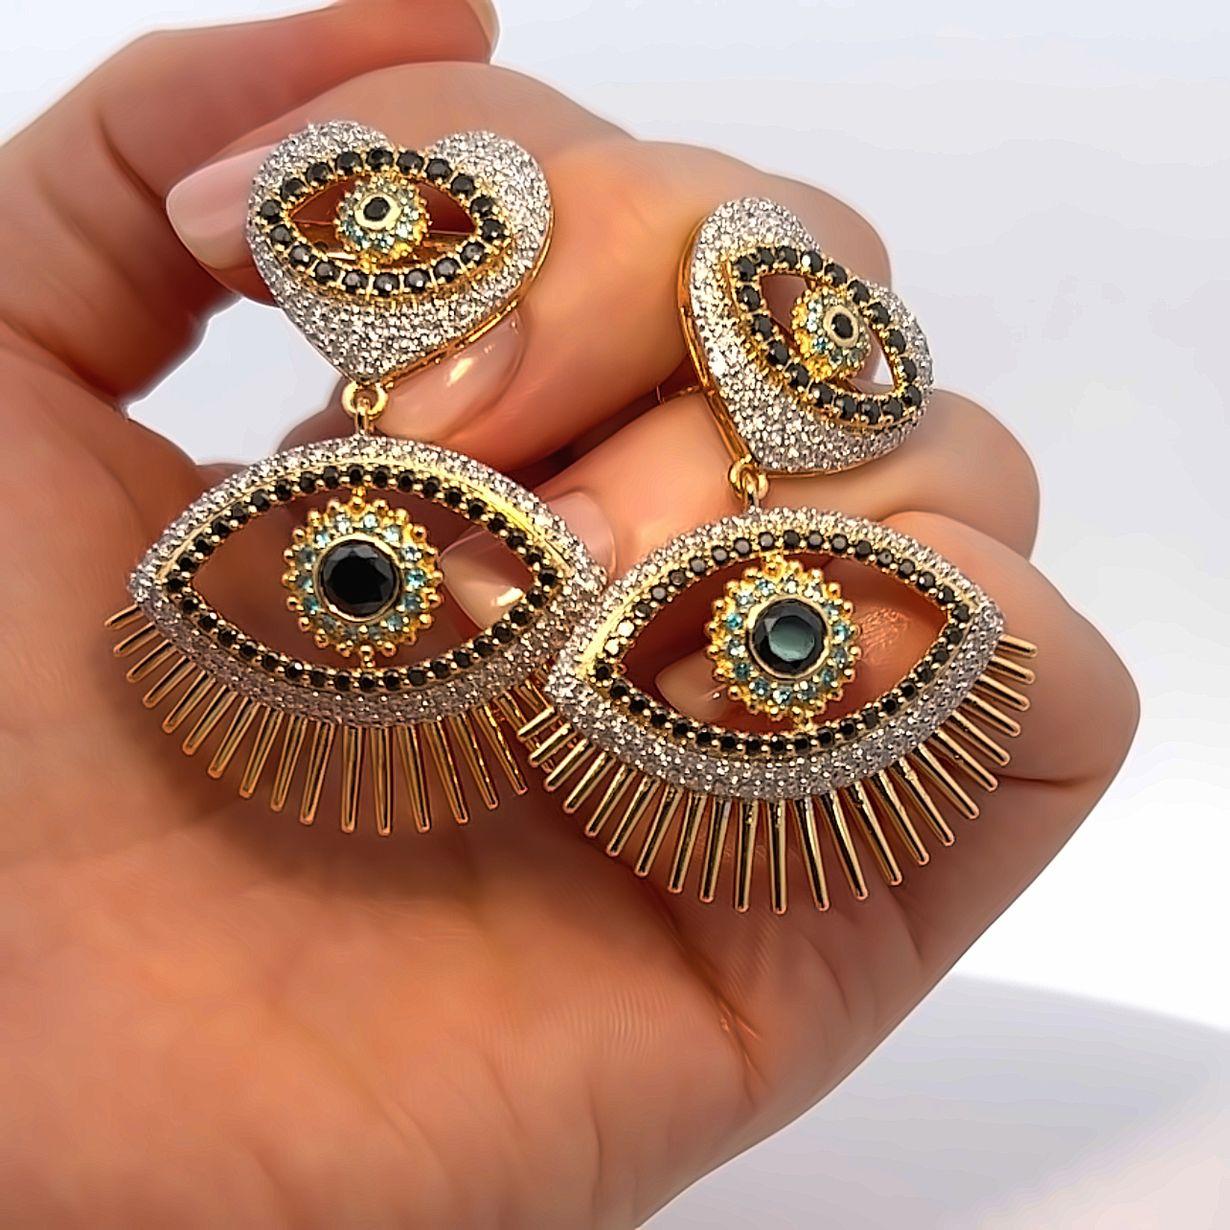 Introducing our captivating Evil Eye Earrings, a contemporary and stylish reinterpretation of a timeless symbol of protection. These enchanting earrings are meticulously handcrafted with the utmost precision and care, designed not only to elevate